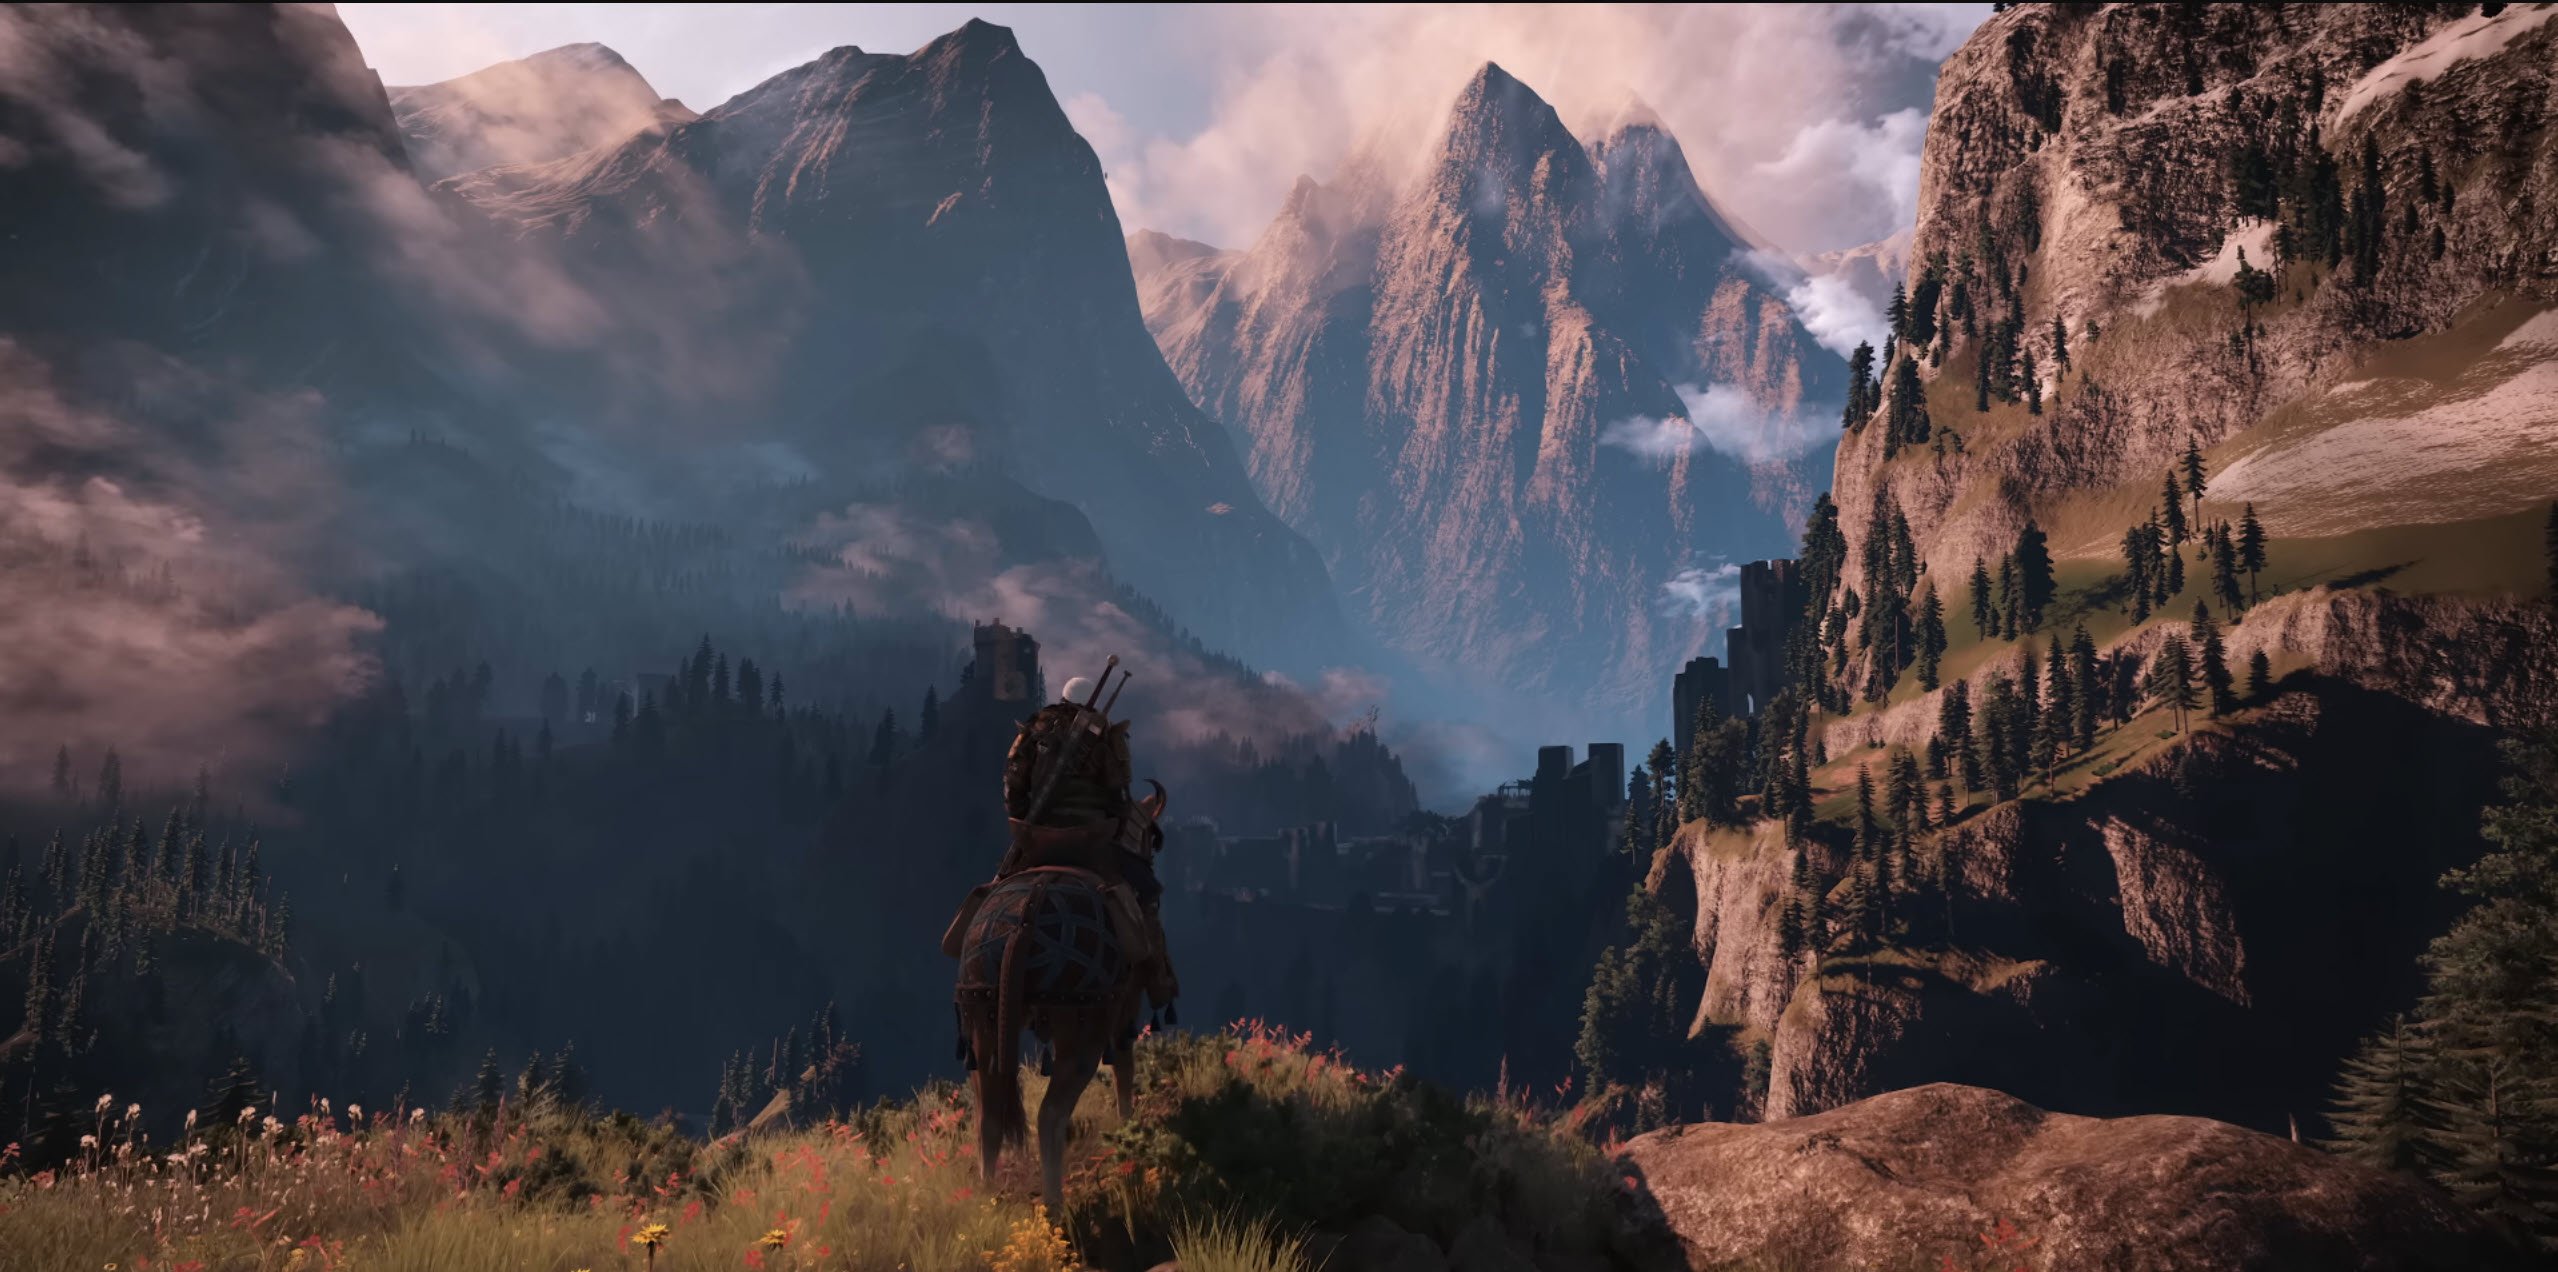 The Witcher 3 Next-Gen Review